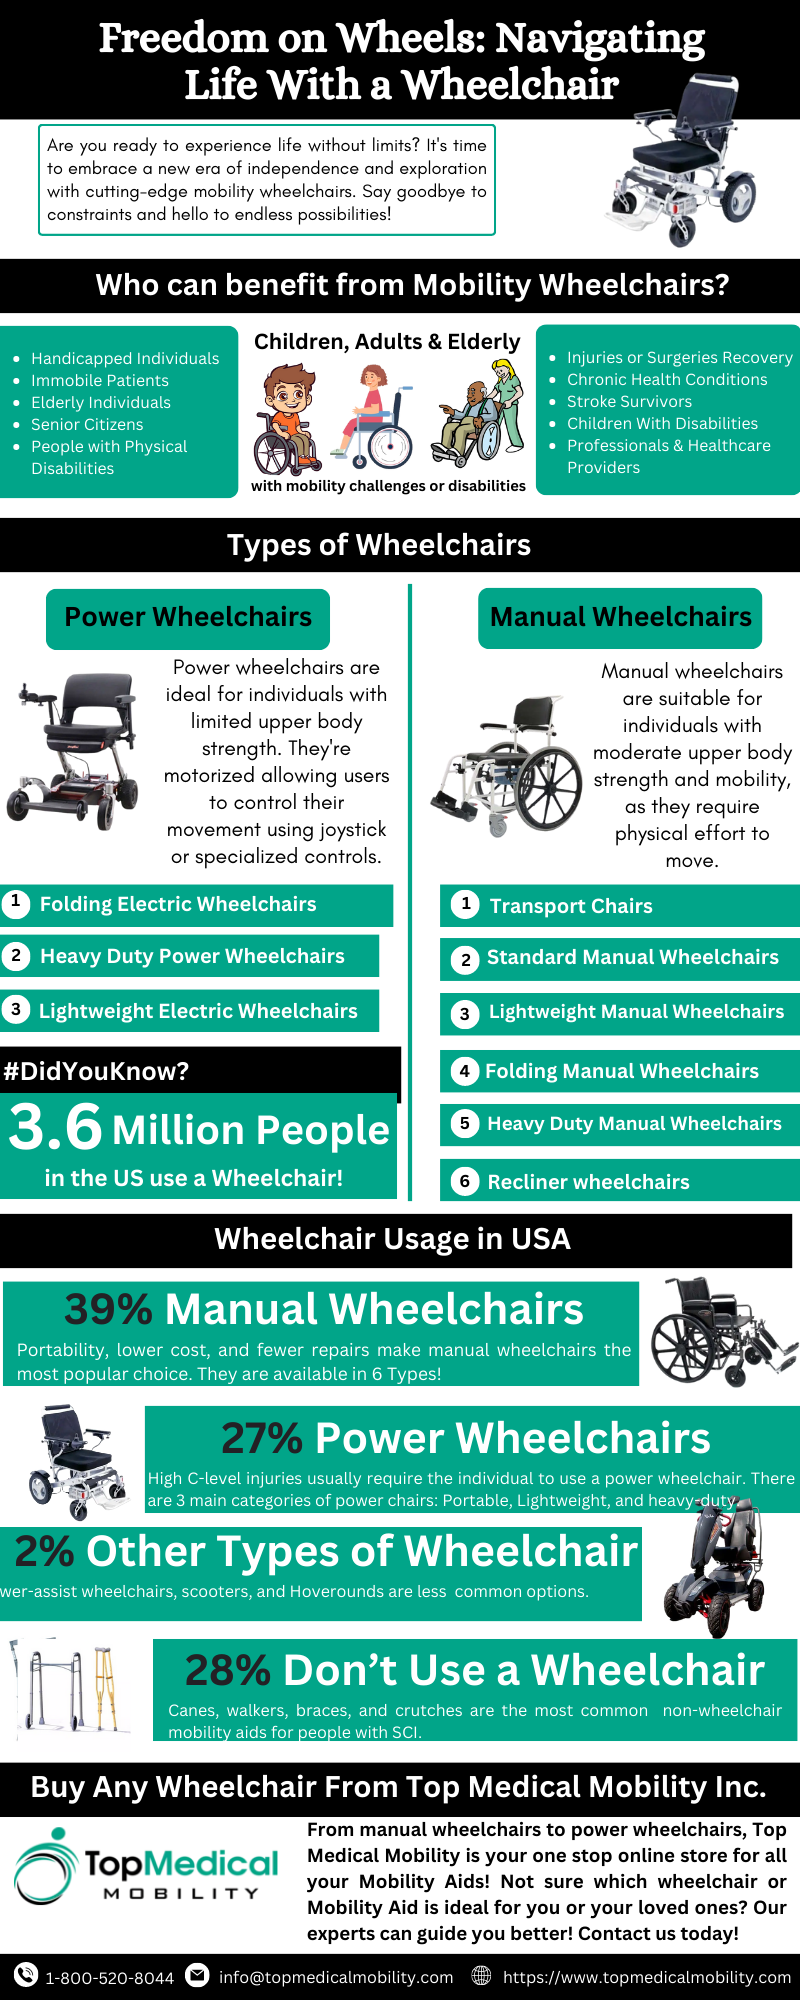 Mobility Wheelchairs Infographic by Top Medical Mobility